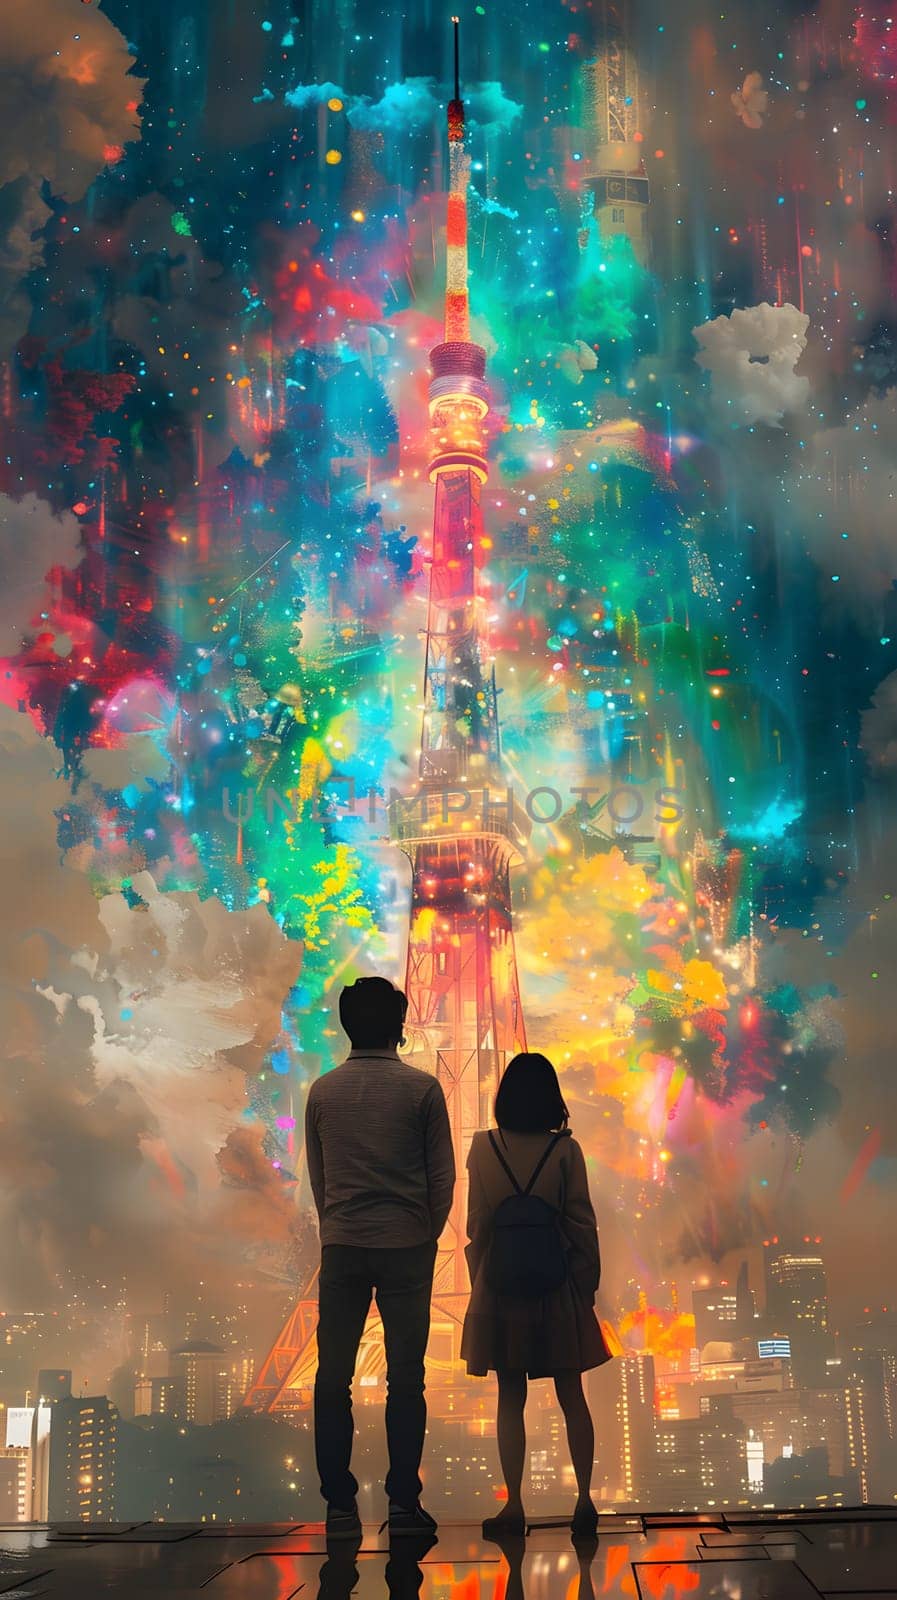 A man and a woman admire a colorful painting of a tower in the world of visual arts, surrounded by tints and shades. They look happy and fascinated by the art display